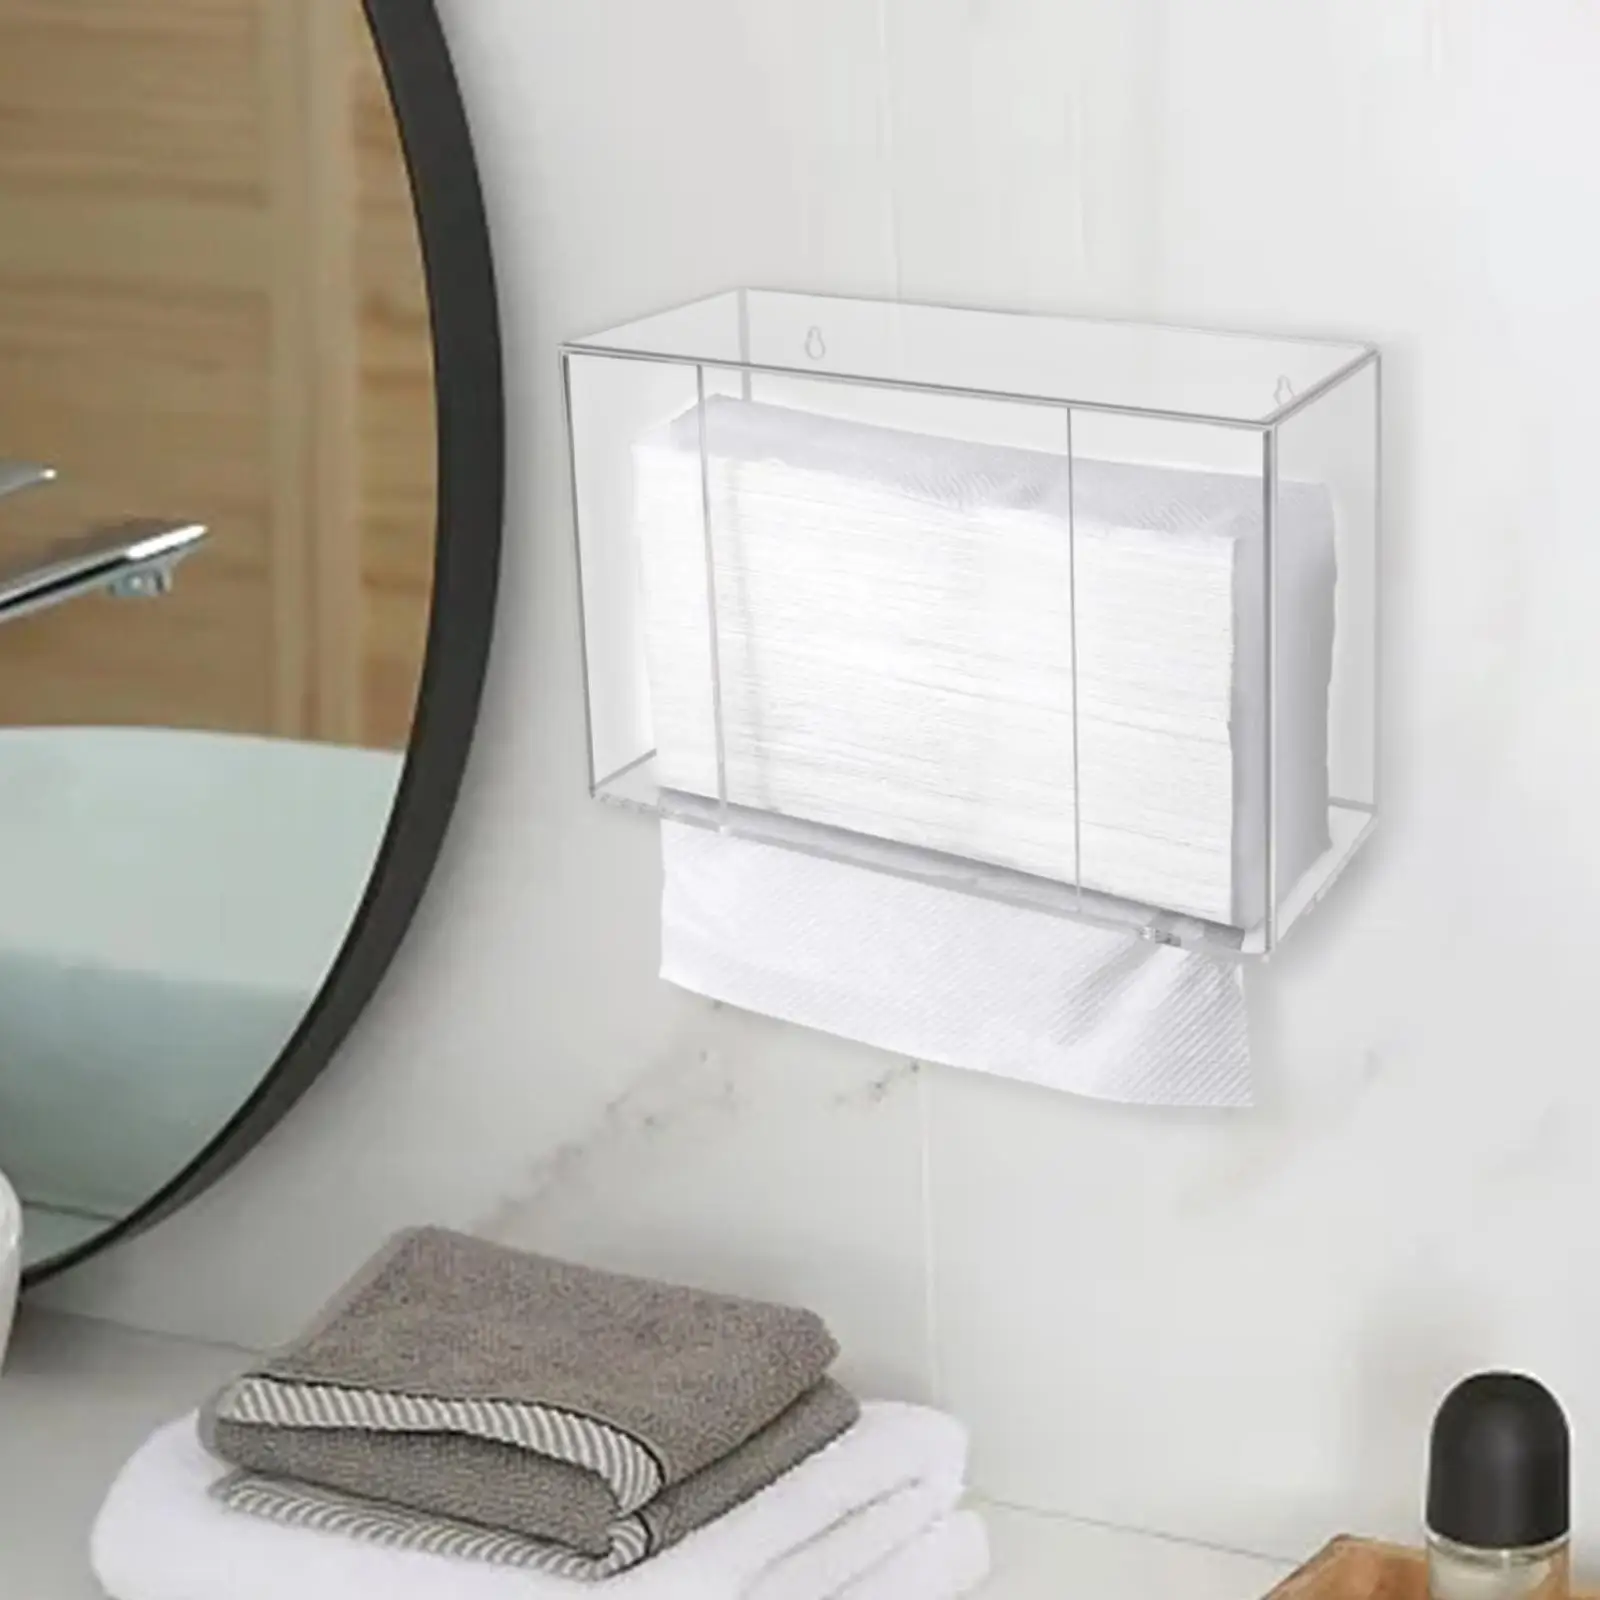 Tissue Holder Wall Mounted Paper Towel Holder Clear Tissue Dispenser Box for Home Decorative Hotel Bathroom kitchen Room